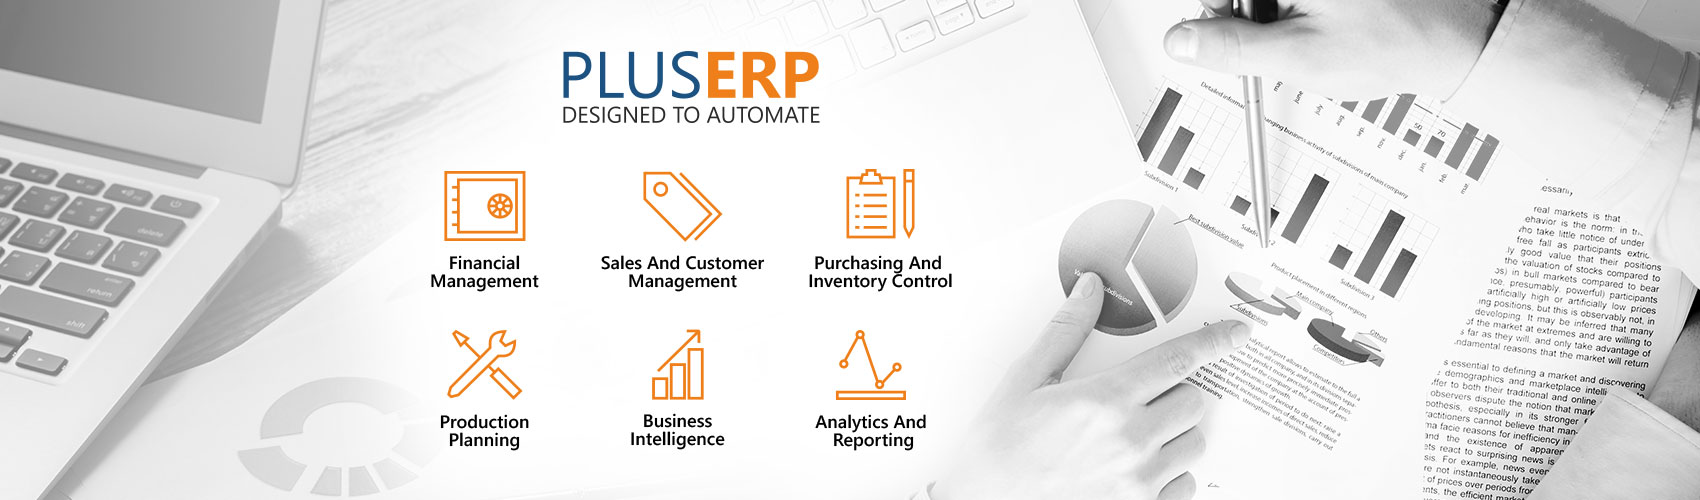 Plue ERP Design To Automate